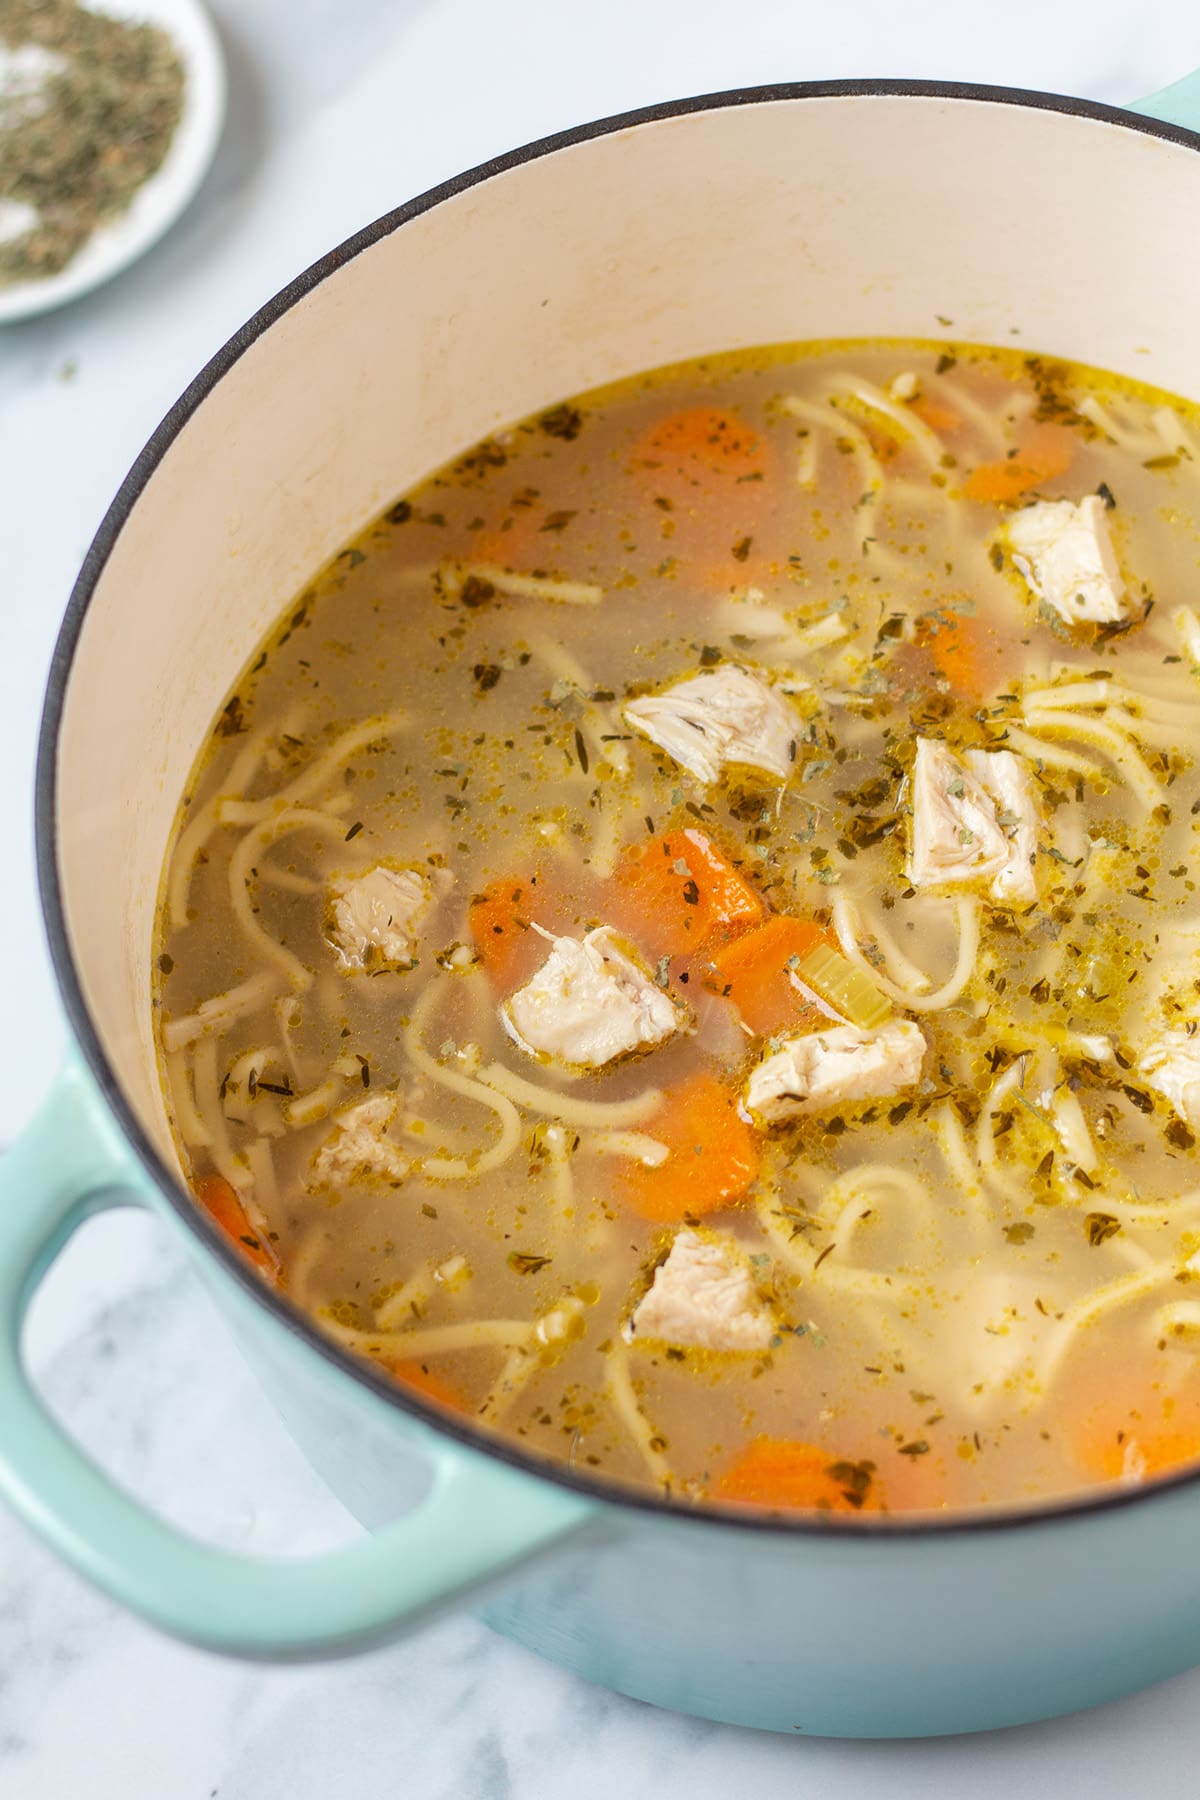 Chunky chicken noodle soup with slices of carrots in a large, heavy-bottomed soup pot with 2 handles.